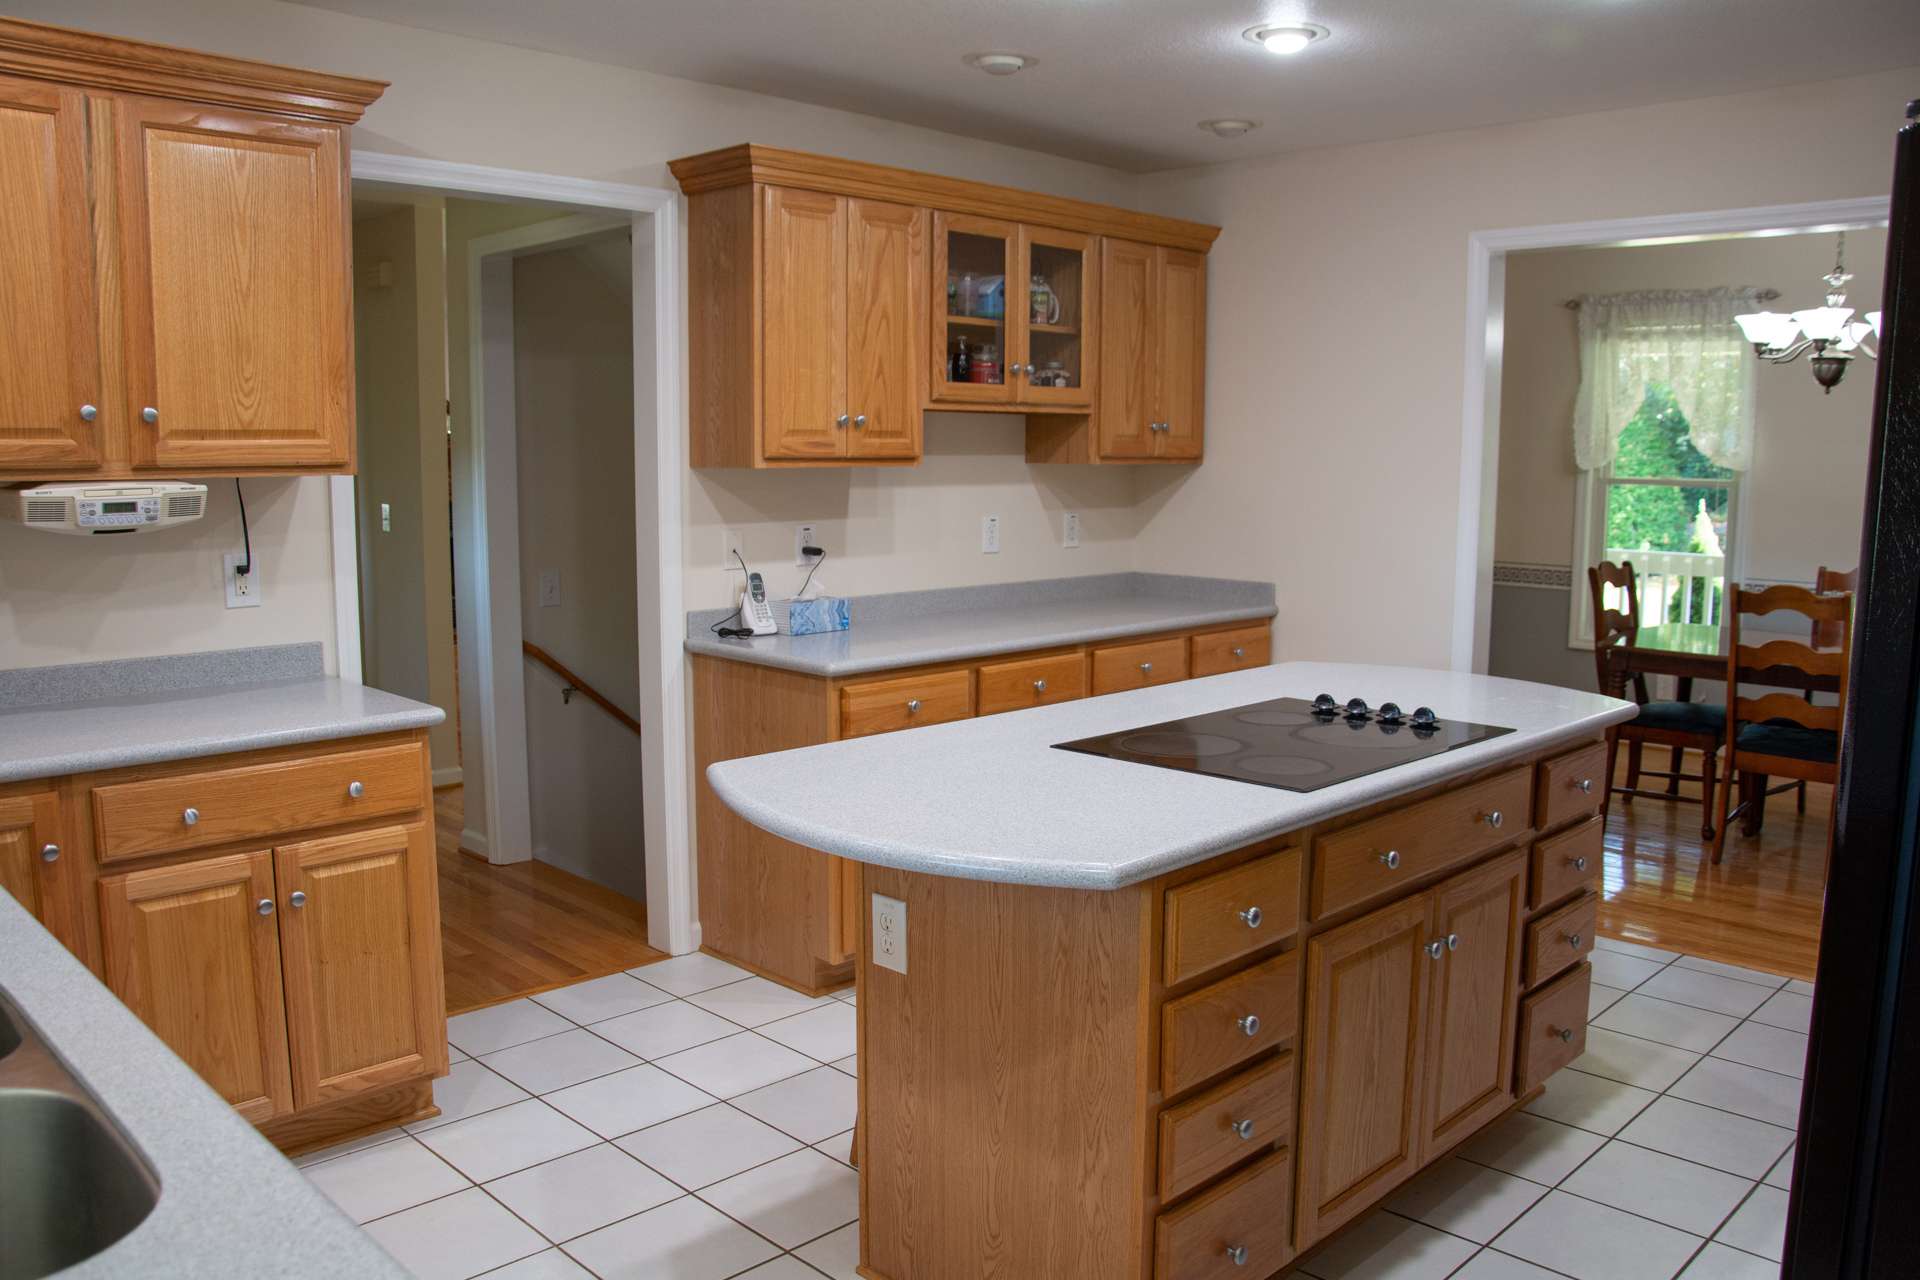 Counter tops are Corian, floor is ceramic tile and cabinets are oak.